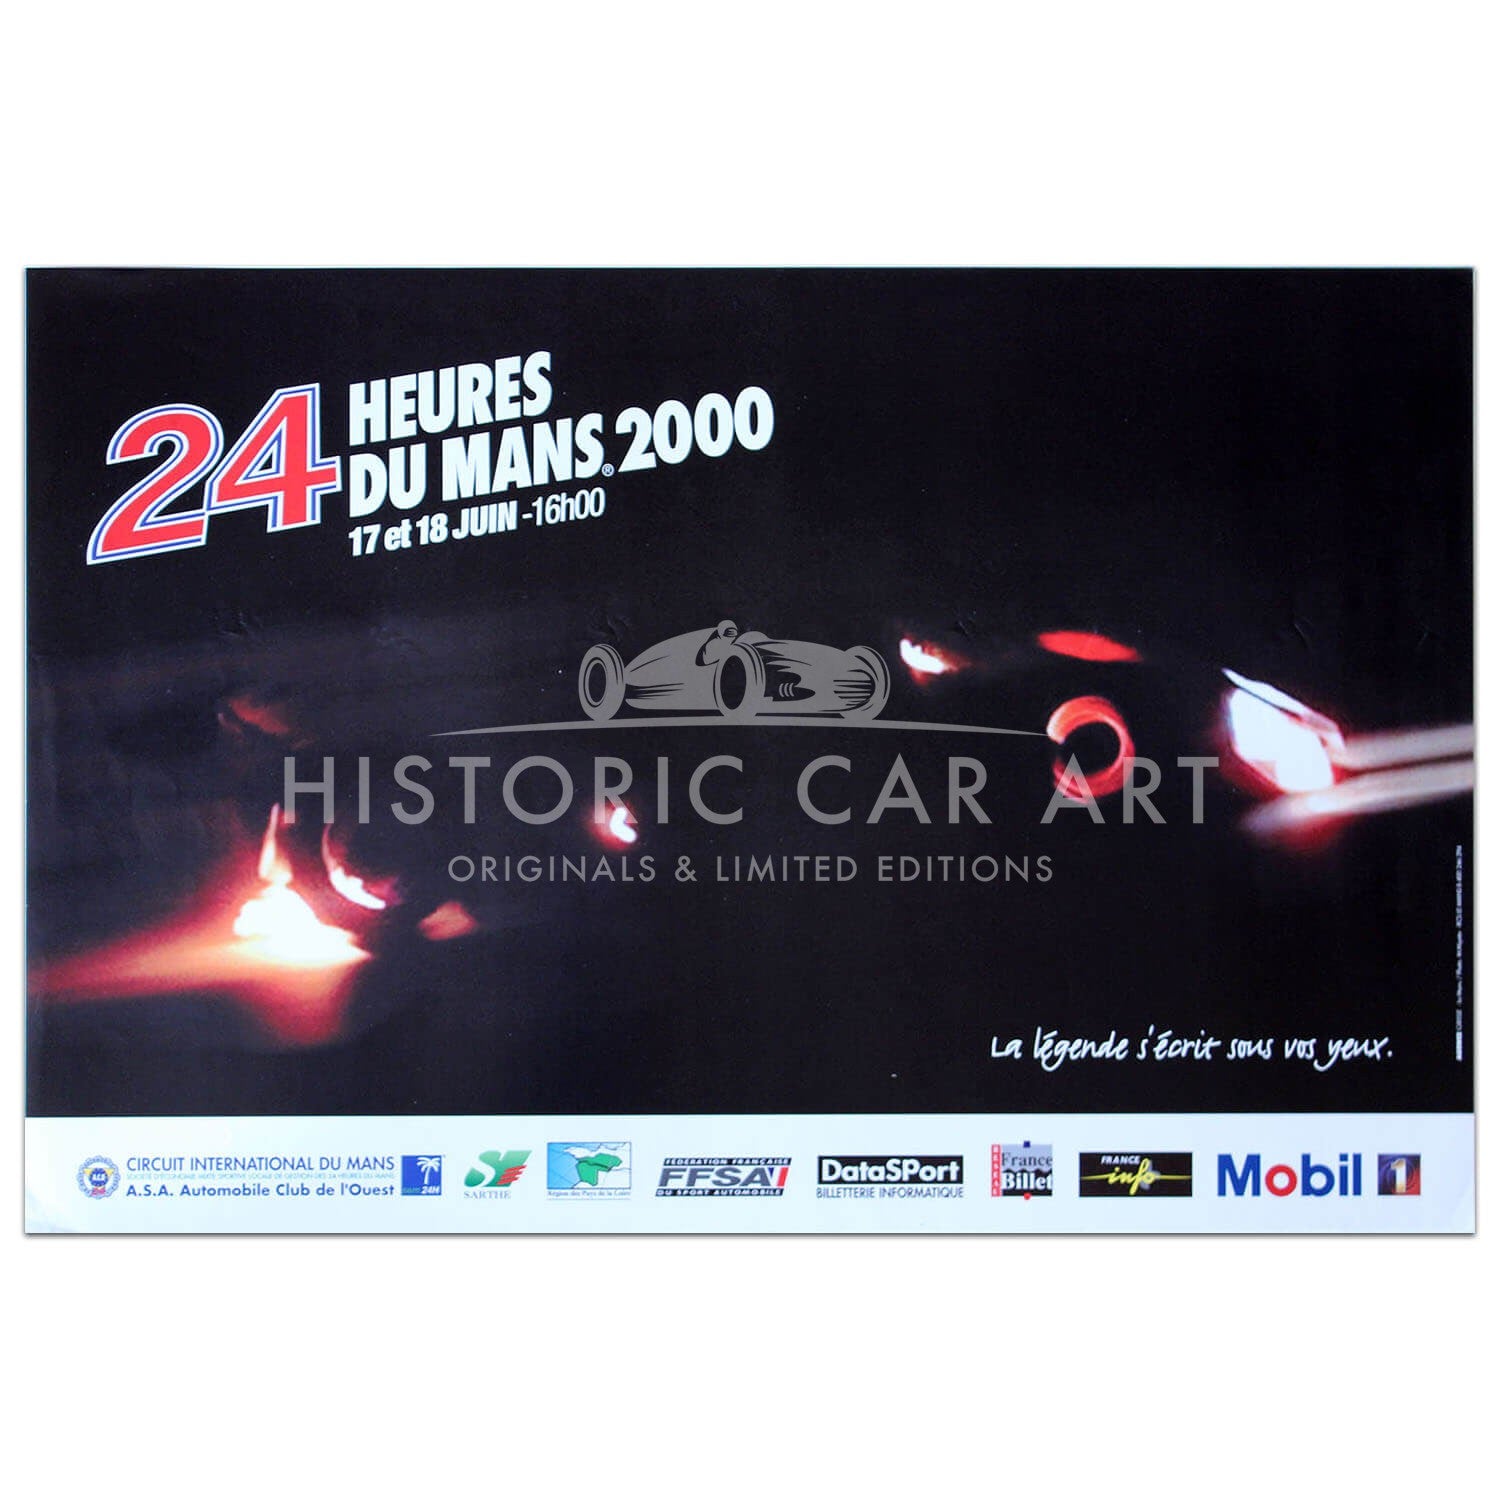 French | Le Mans 24 hours 2000 Original Poster